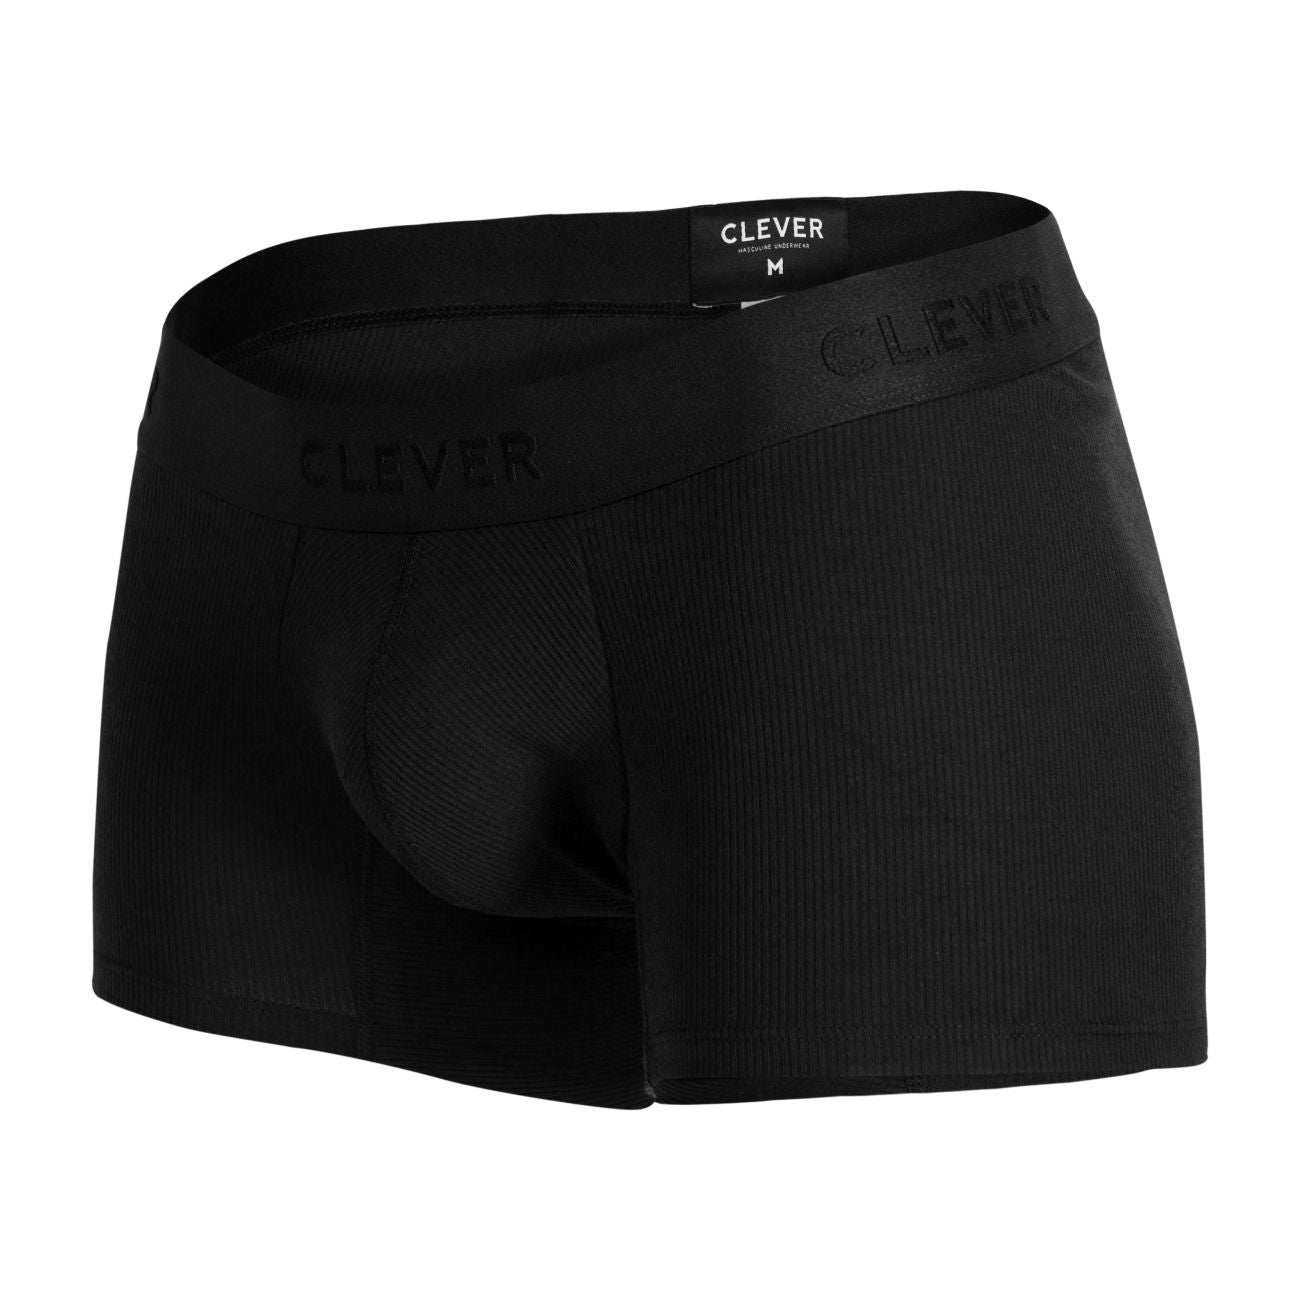 Clever 1471 Heavenly Trunks